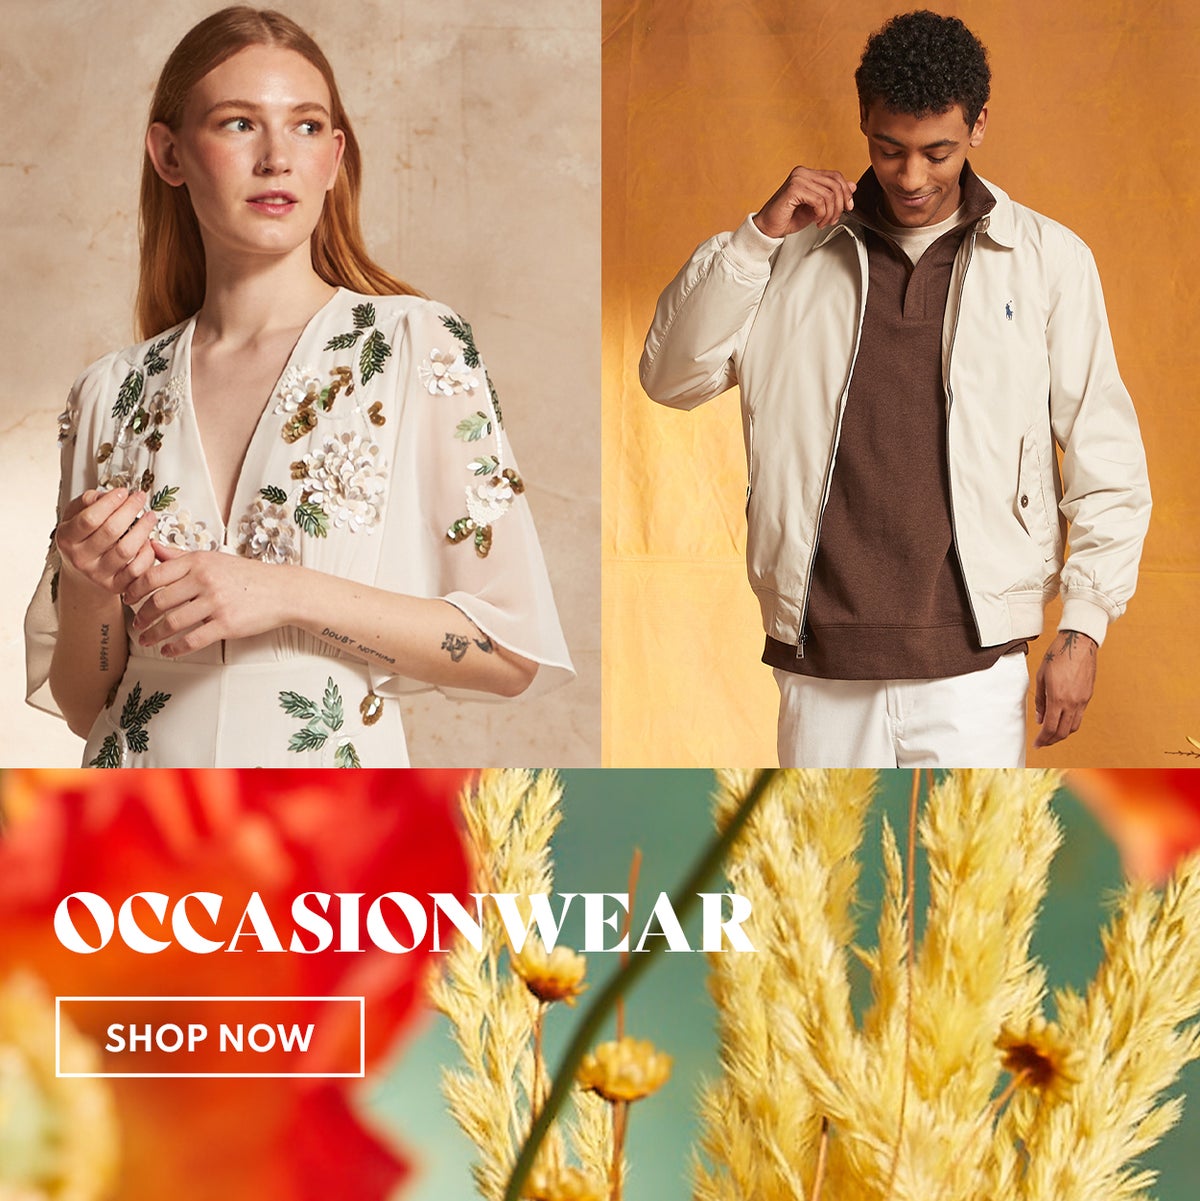 Occassion Wear Shop Now